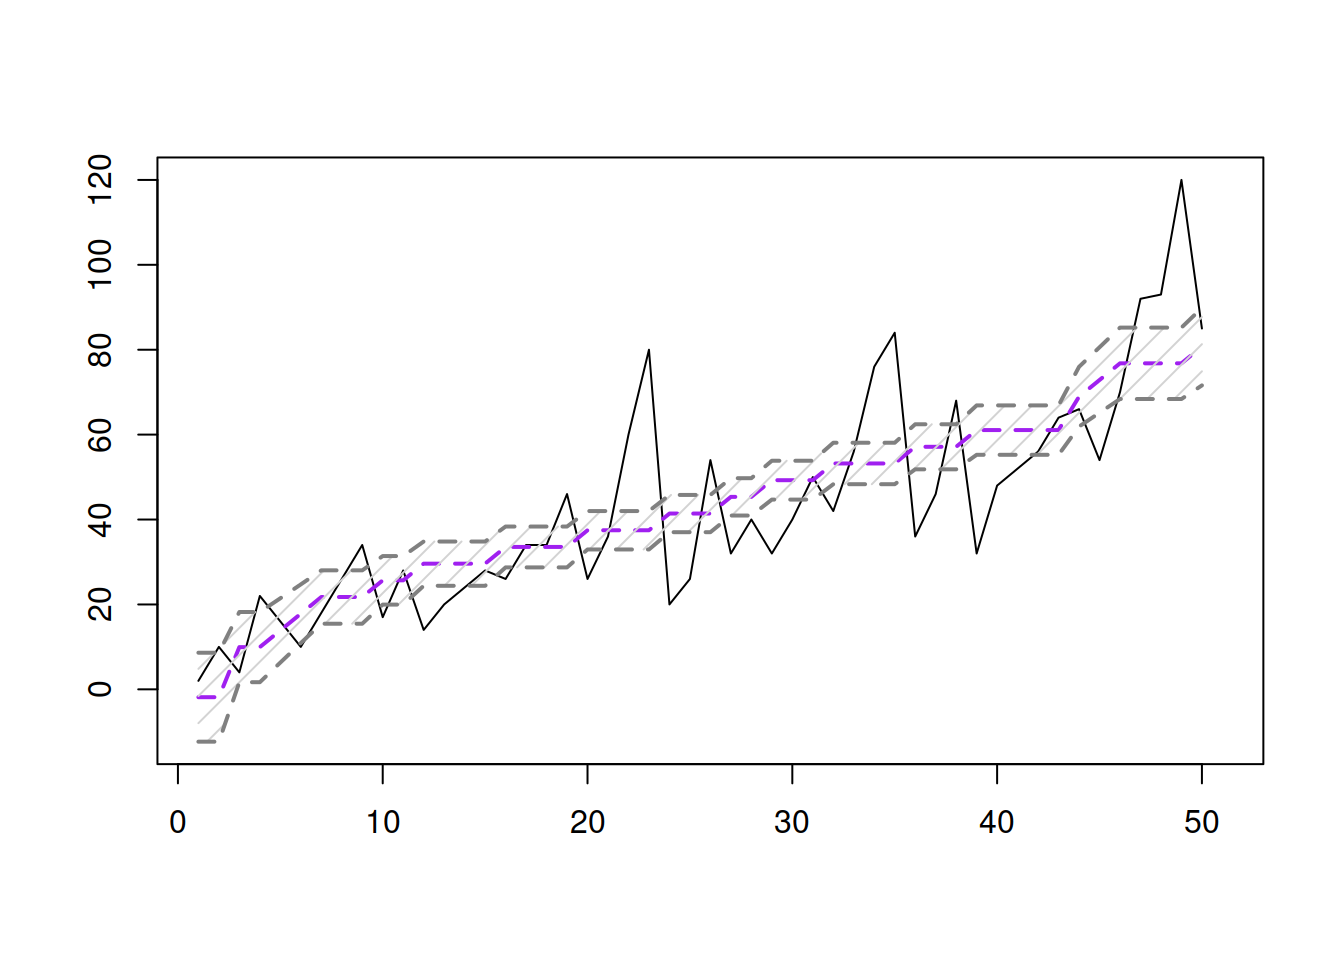 Fitted values and confidence interval for the stopping distance model.